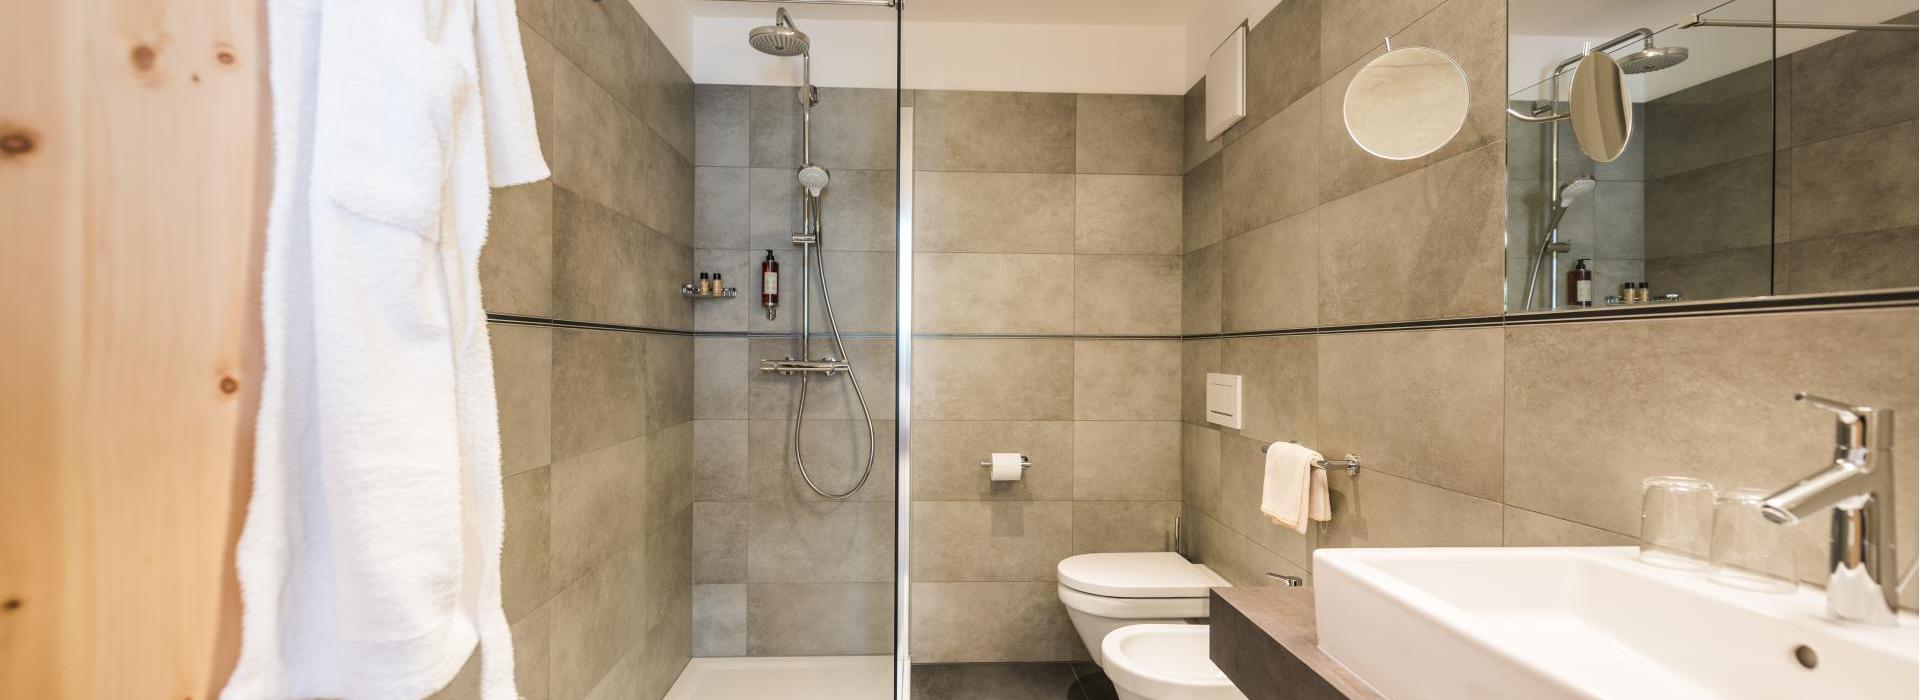 Bathroom of the Junior Suite with shower, washbasin, wc e bidet